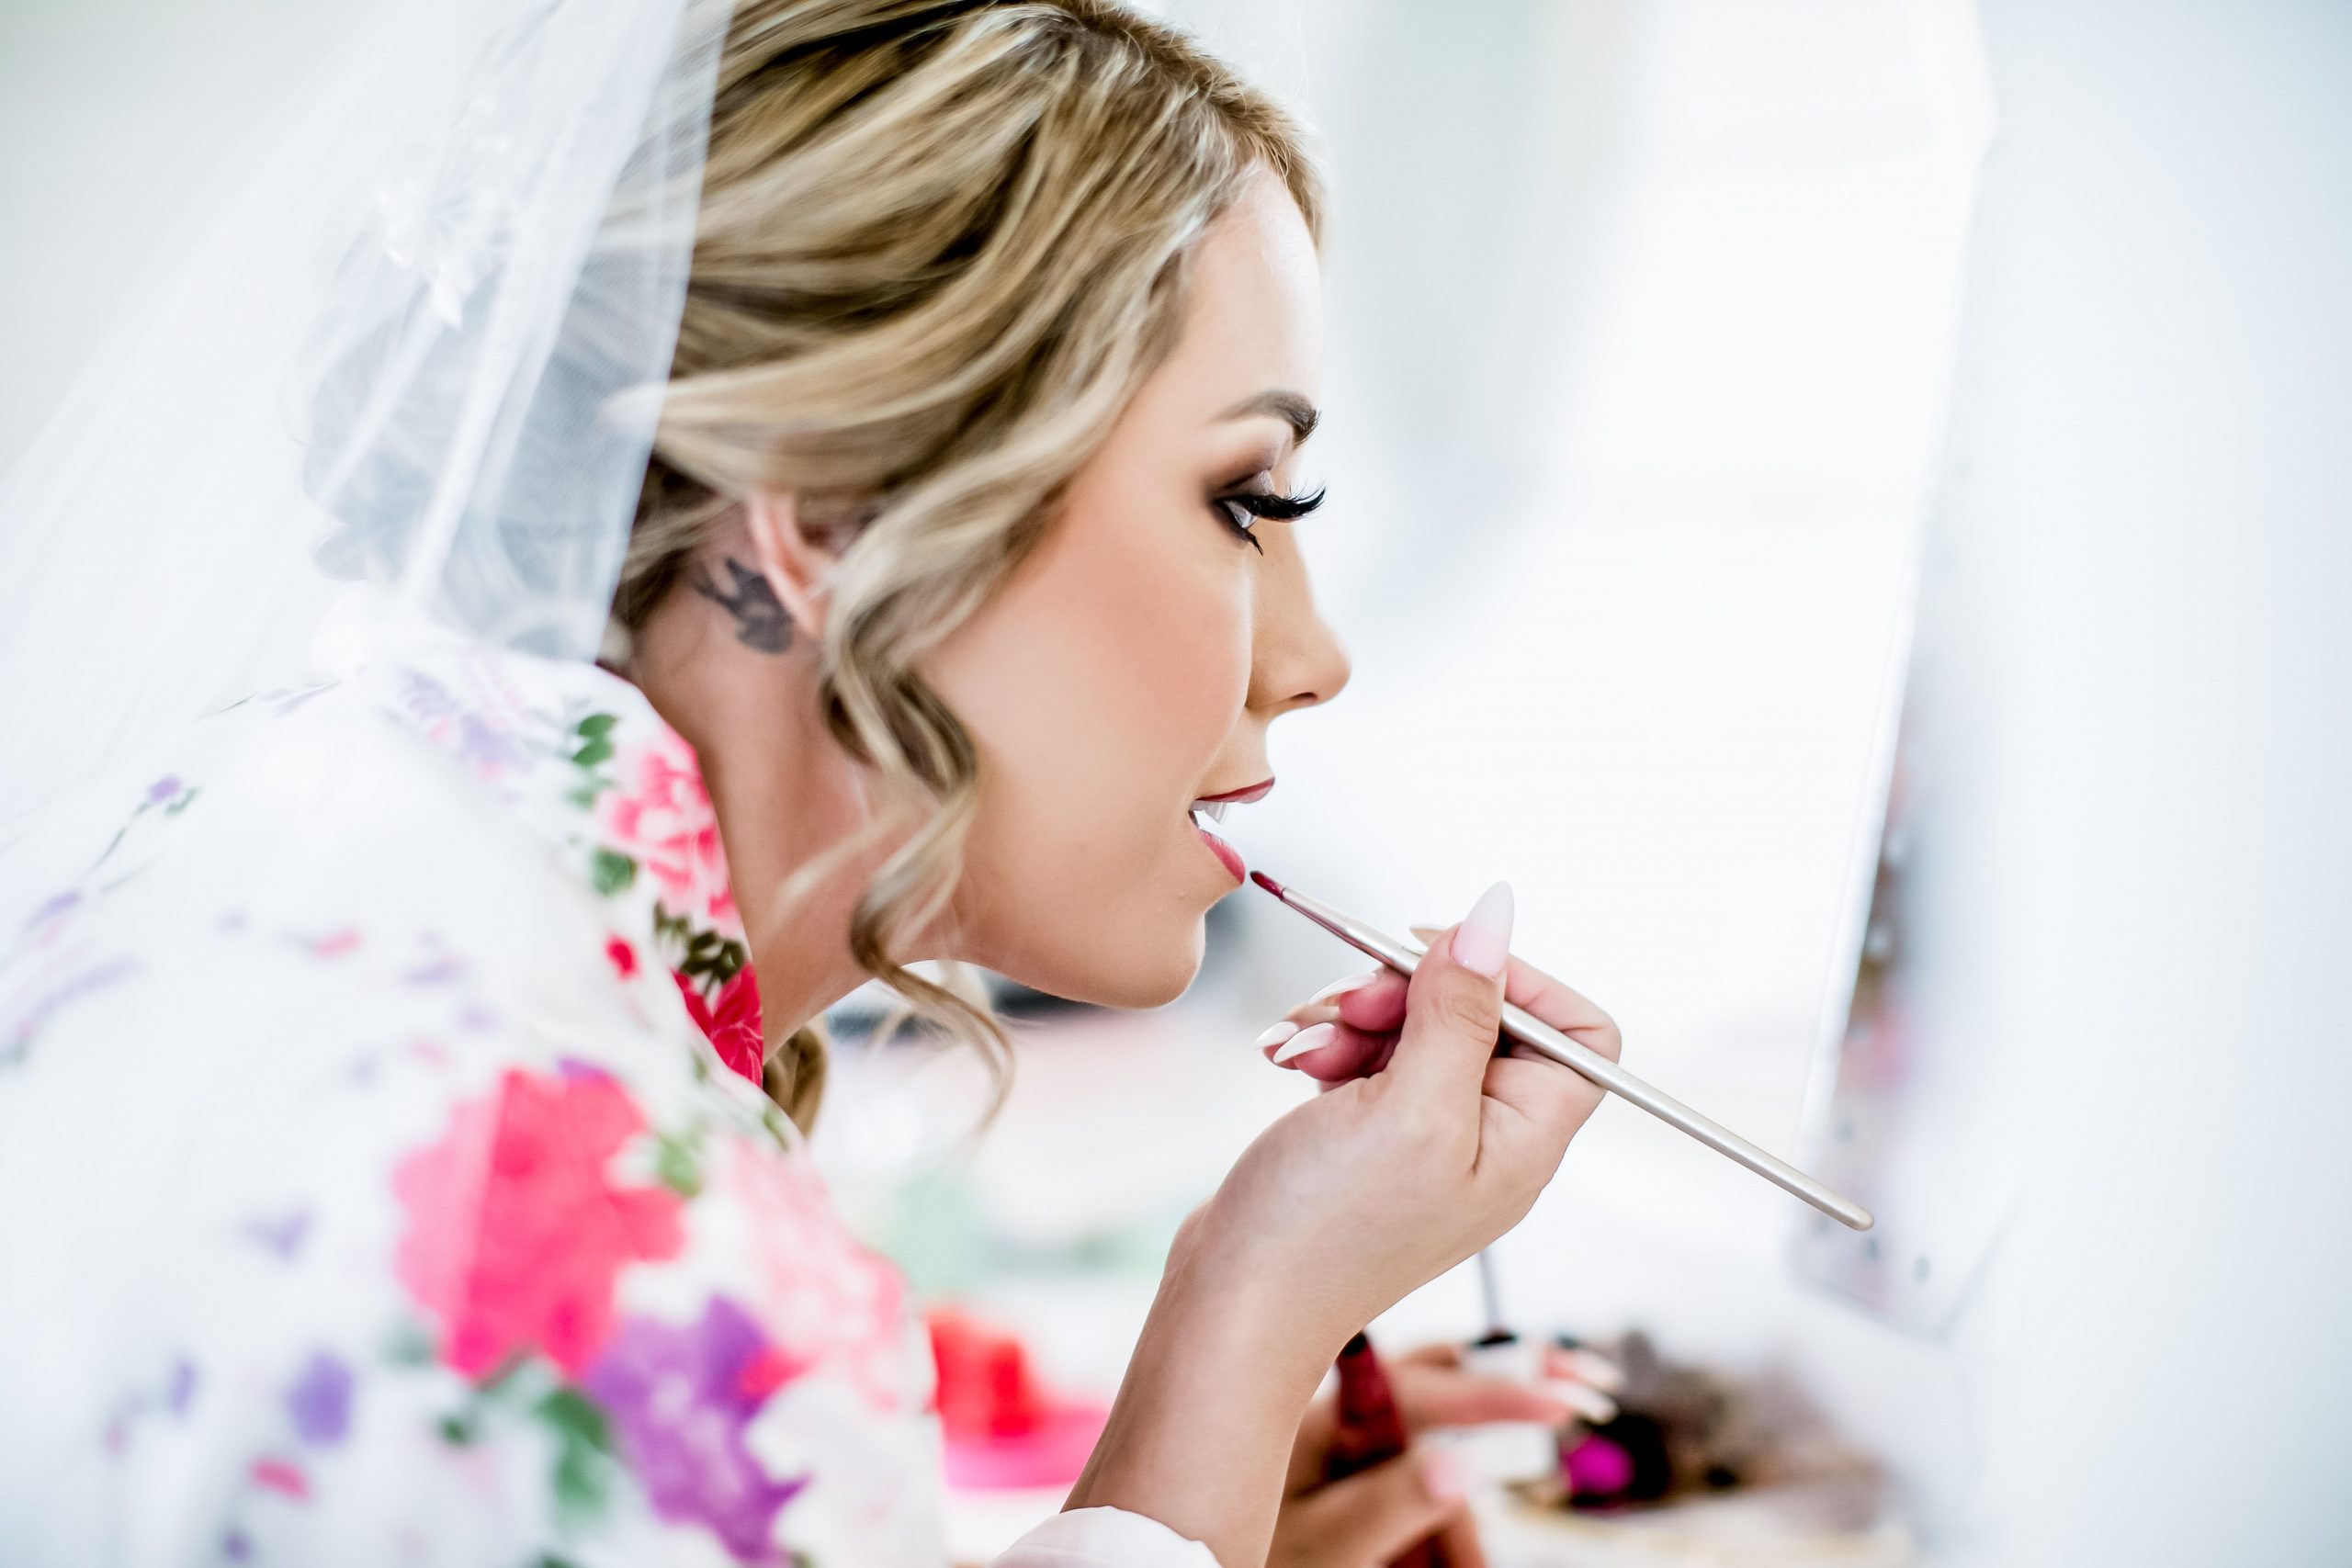 Up your glam game by checking out these bridal make-up trends that are going to be trendsetters in 2022! Read the blog for inspiration!